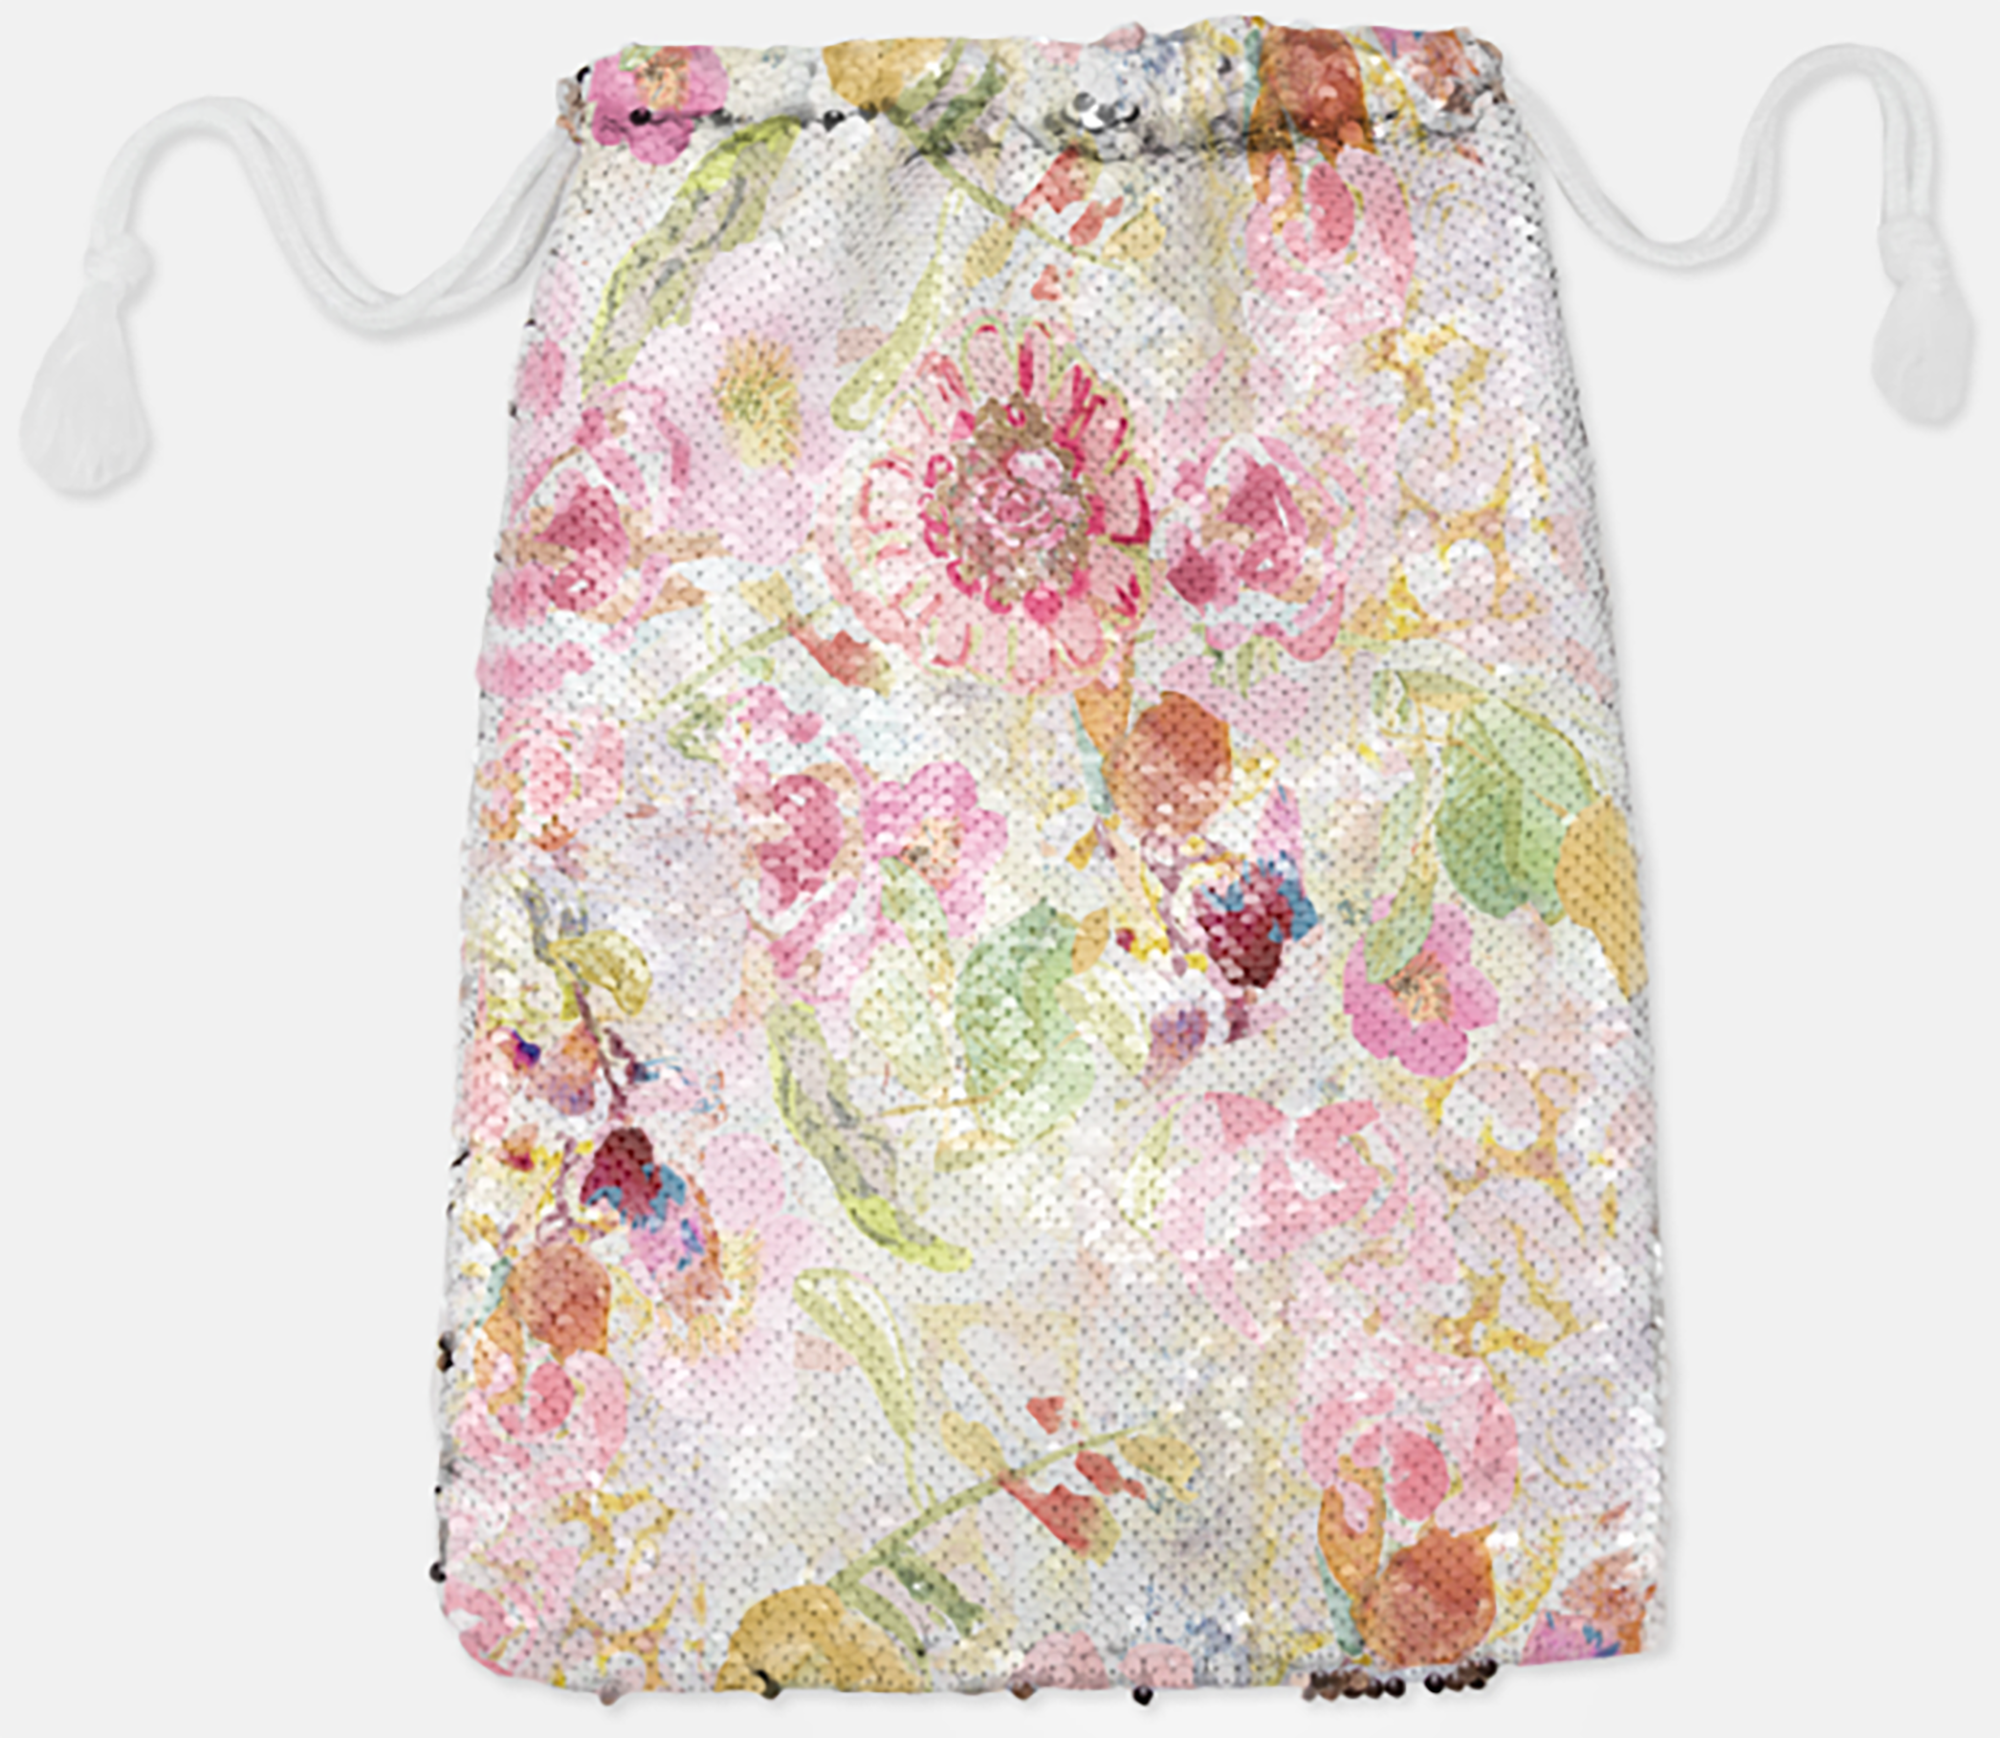 DRAWSTRING BAG - MOM'S PASTEL / SILVER SEQUINS - Dreams After All